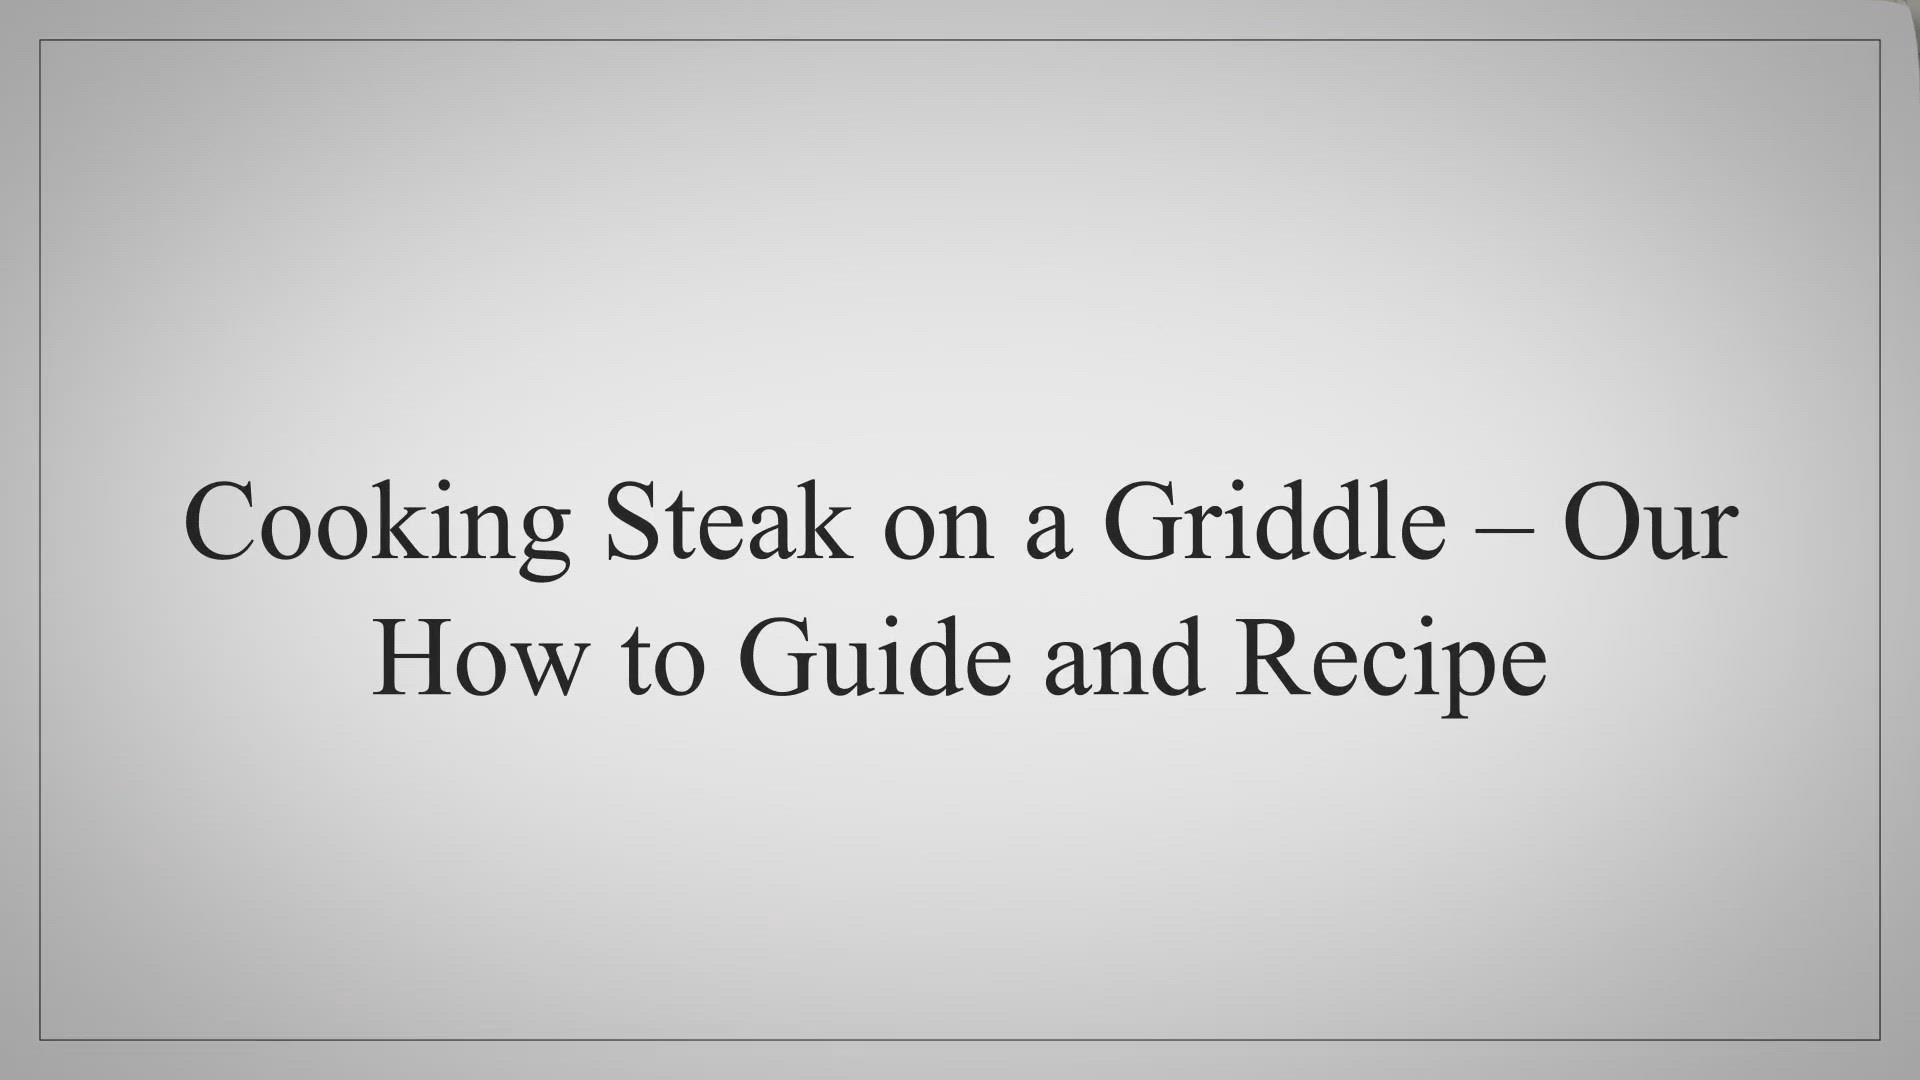 'Video thumbnail for Cooking Steak on a Griddle – Our How to Guide and Recipe'